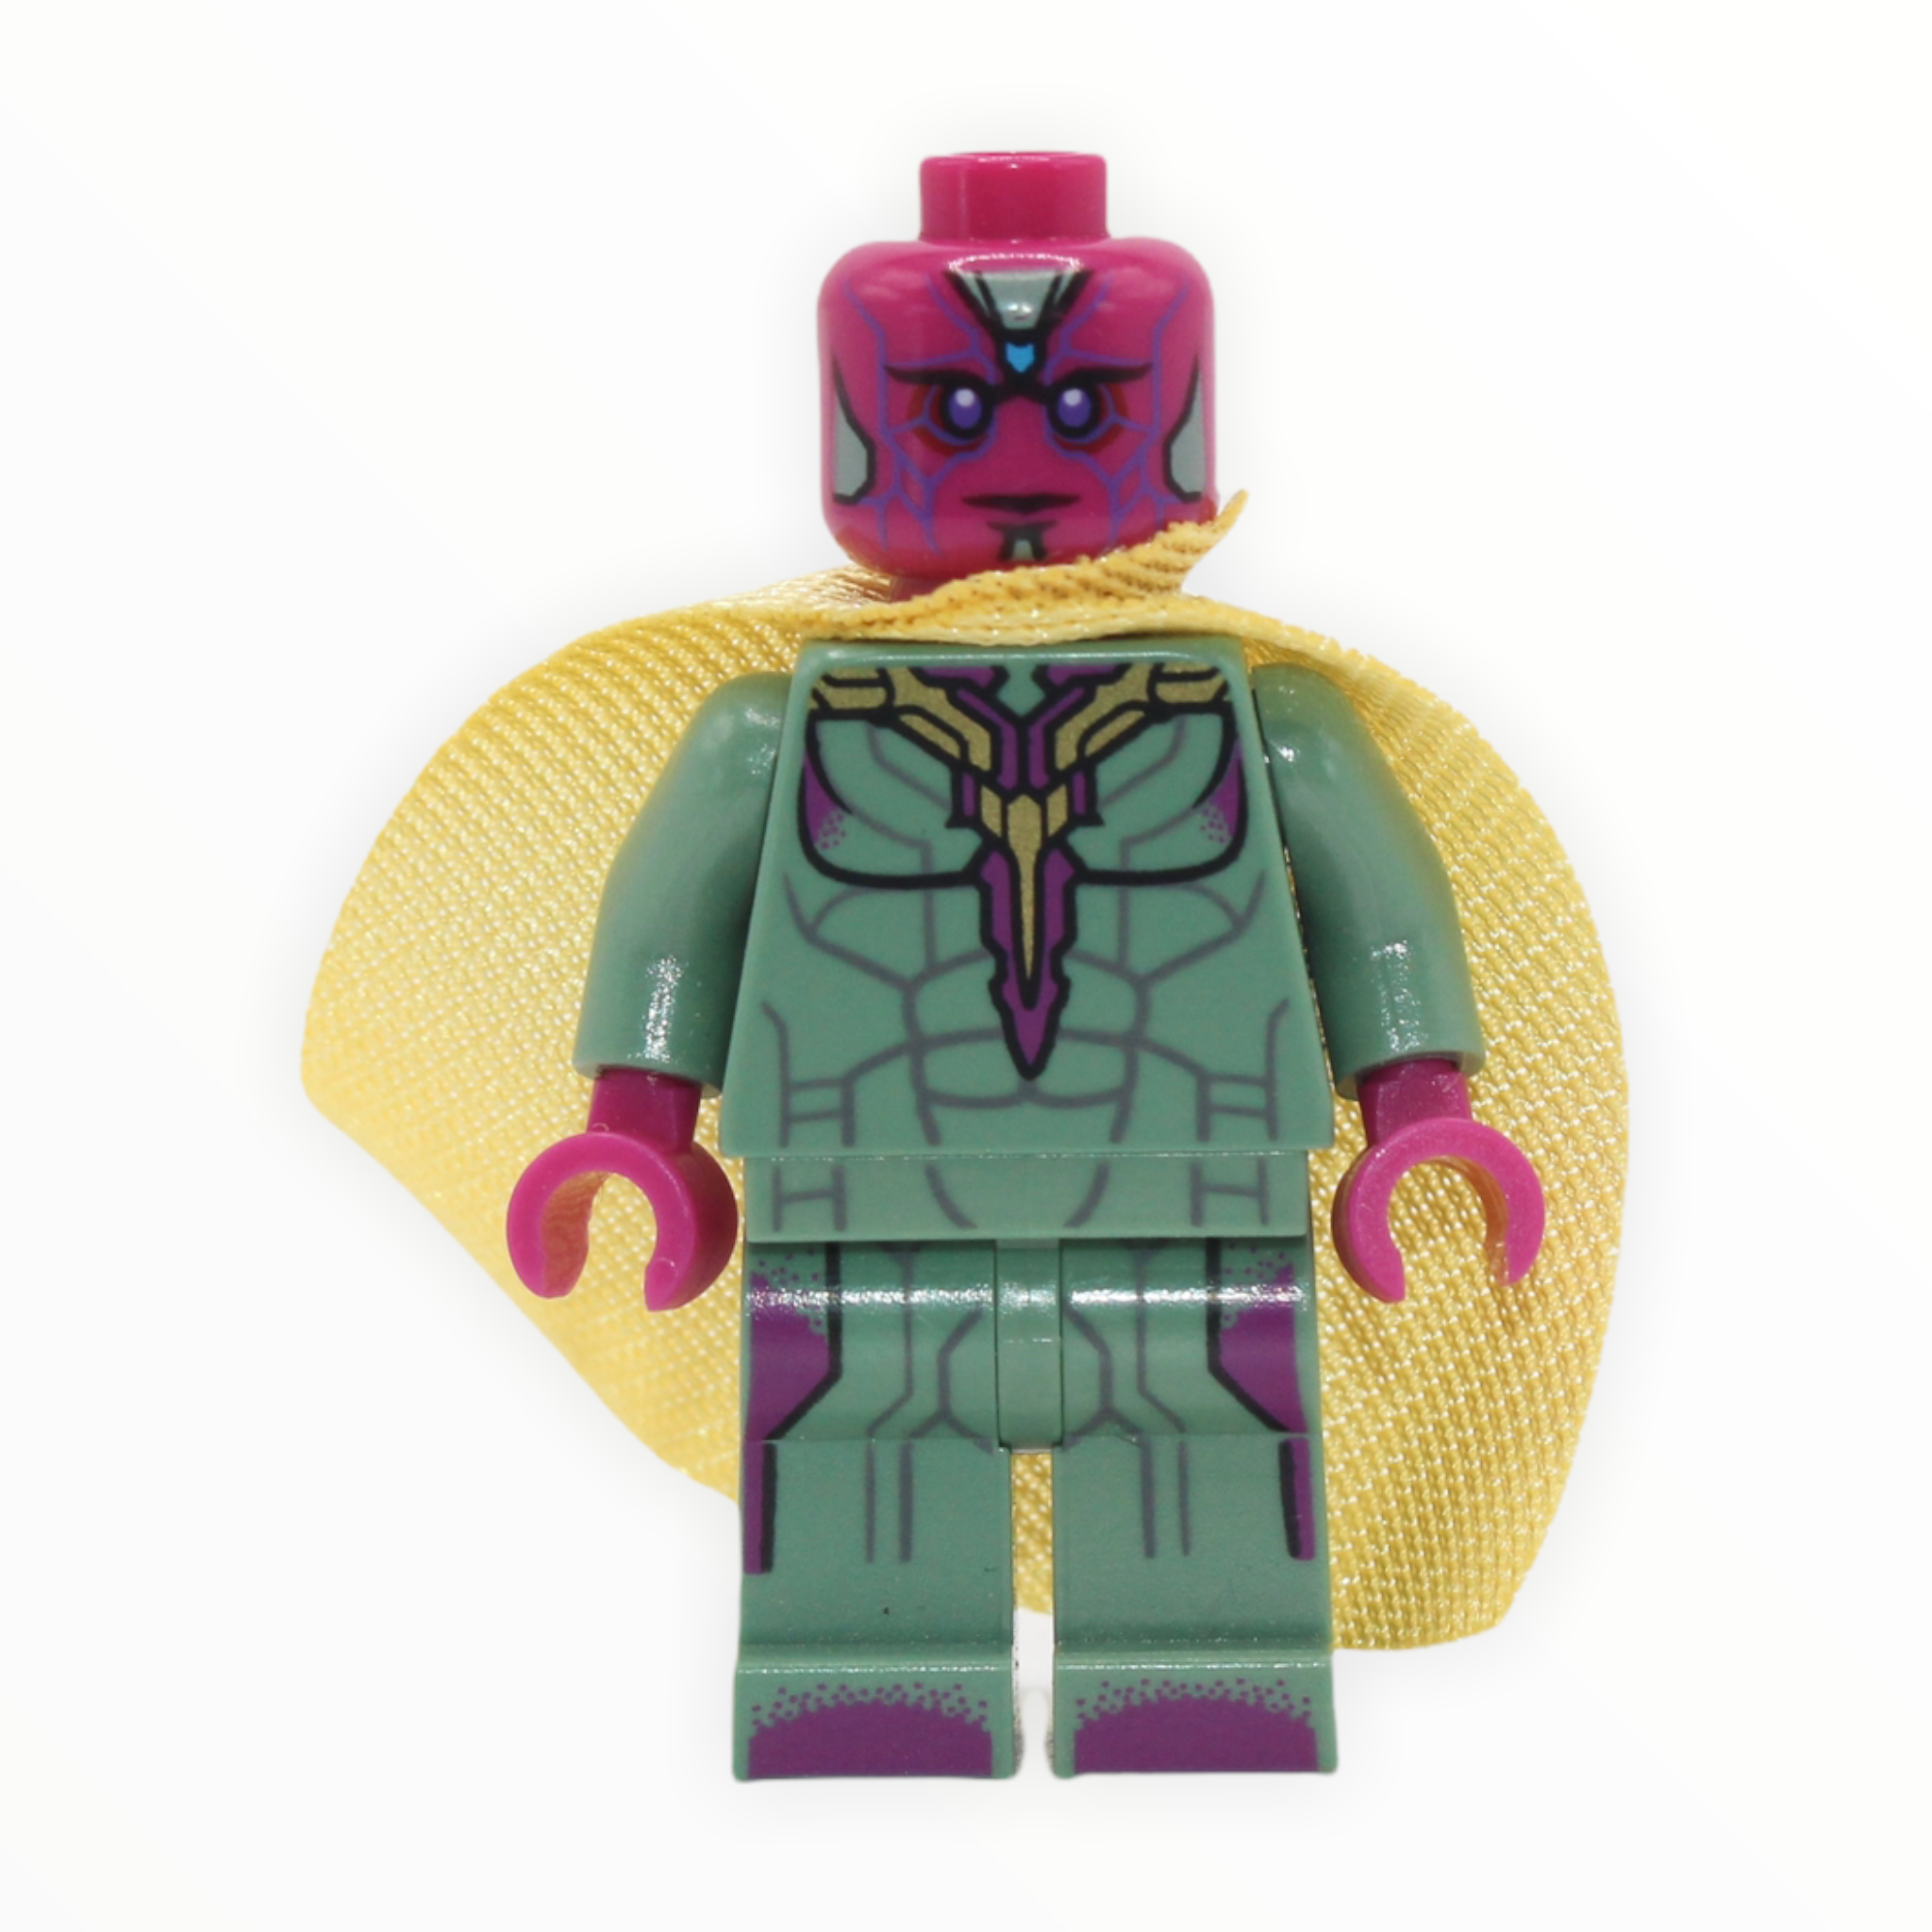 Vision (dark azure spot on forehead, Age of Ultron)